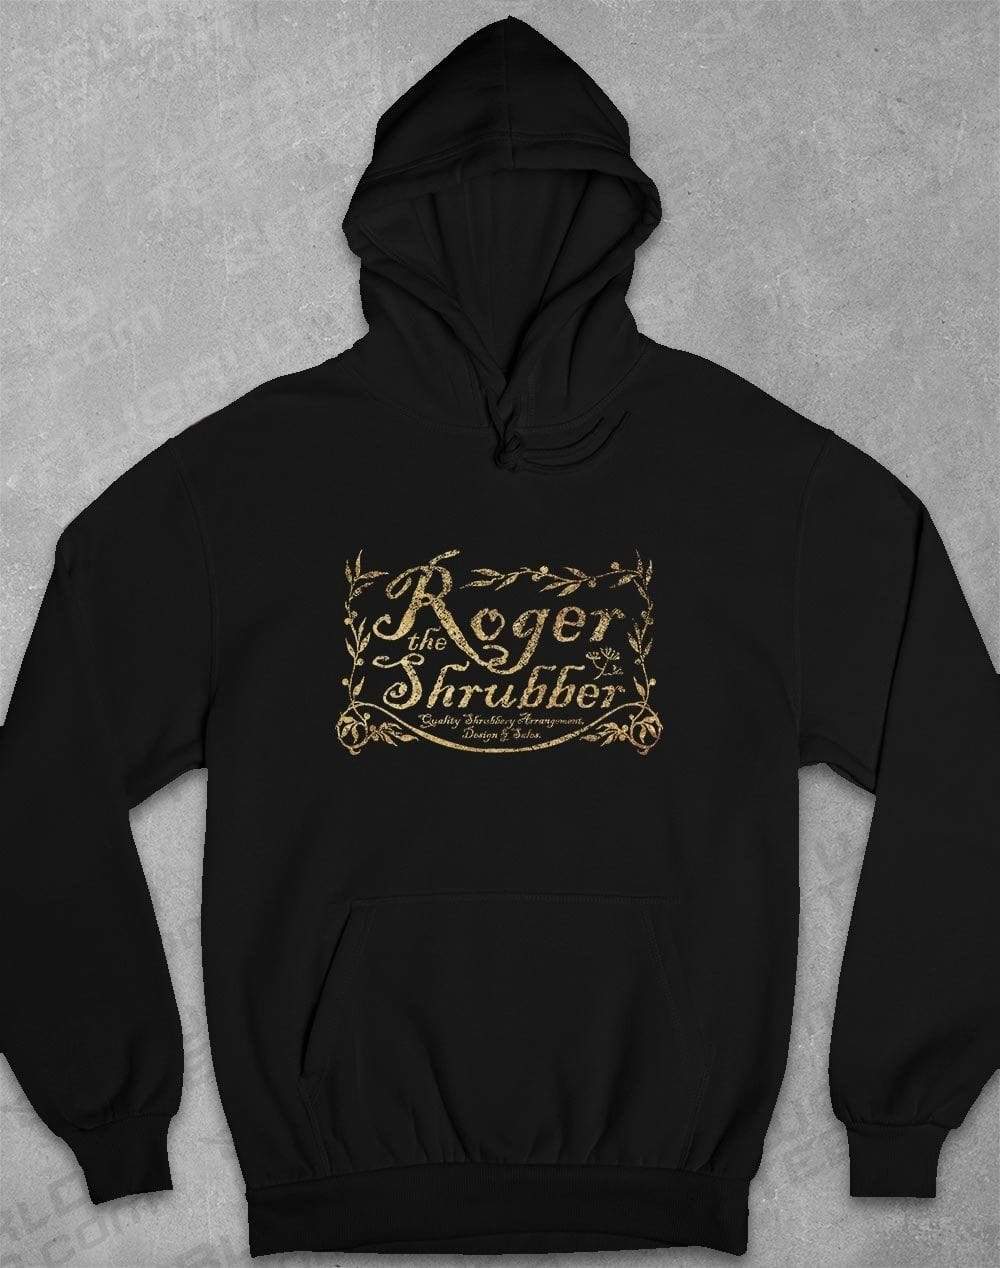 Roger the Shrubber Hoodie S / Black  - Off World Tees